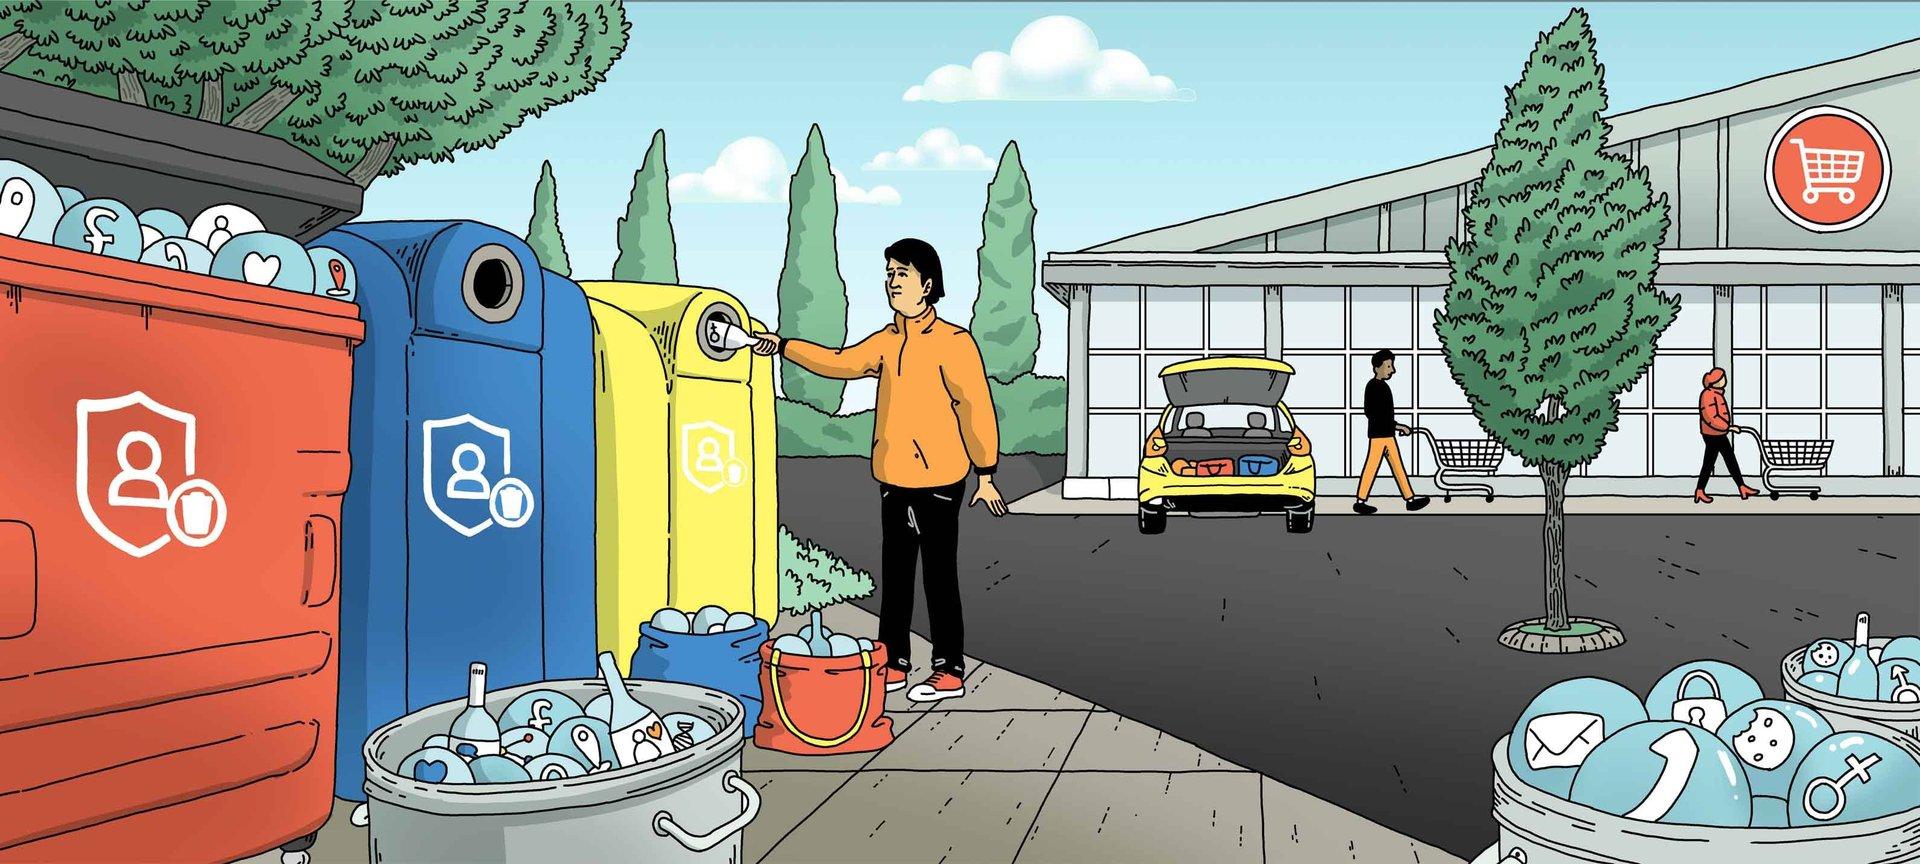 Illustration of a consumer outside a supermarket throwing away his personal information into supermarket companies recycling.